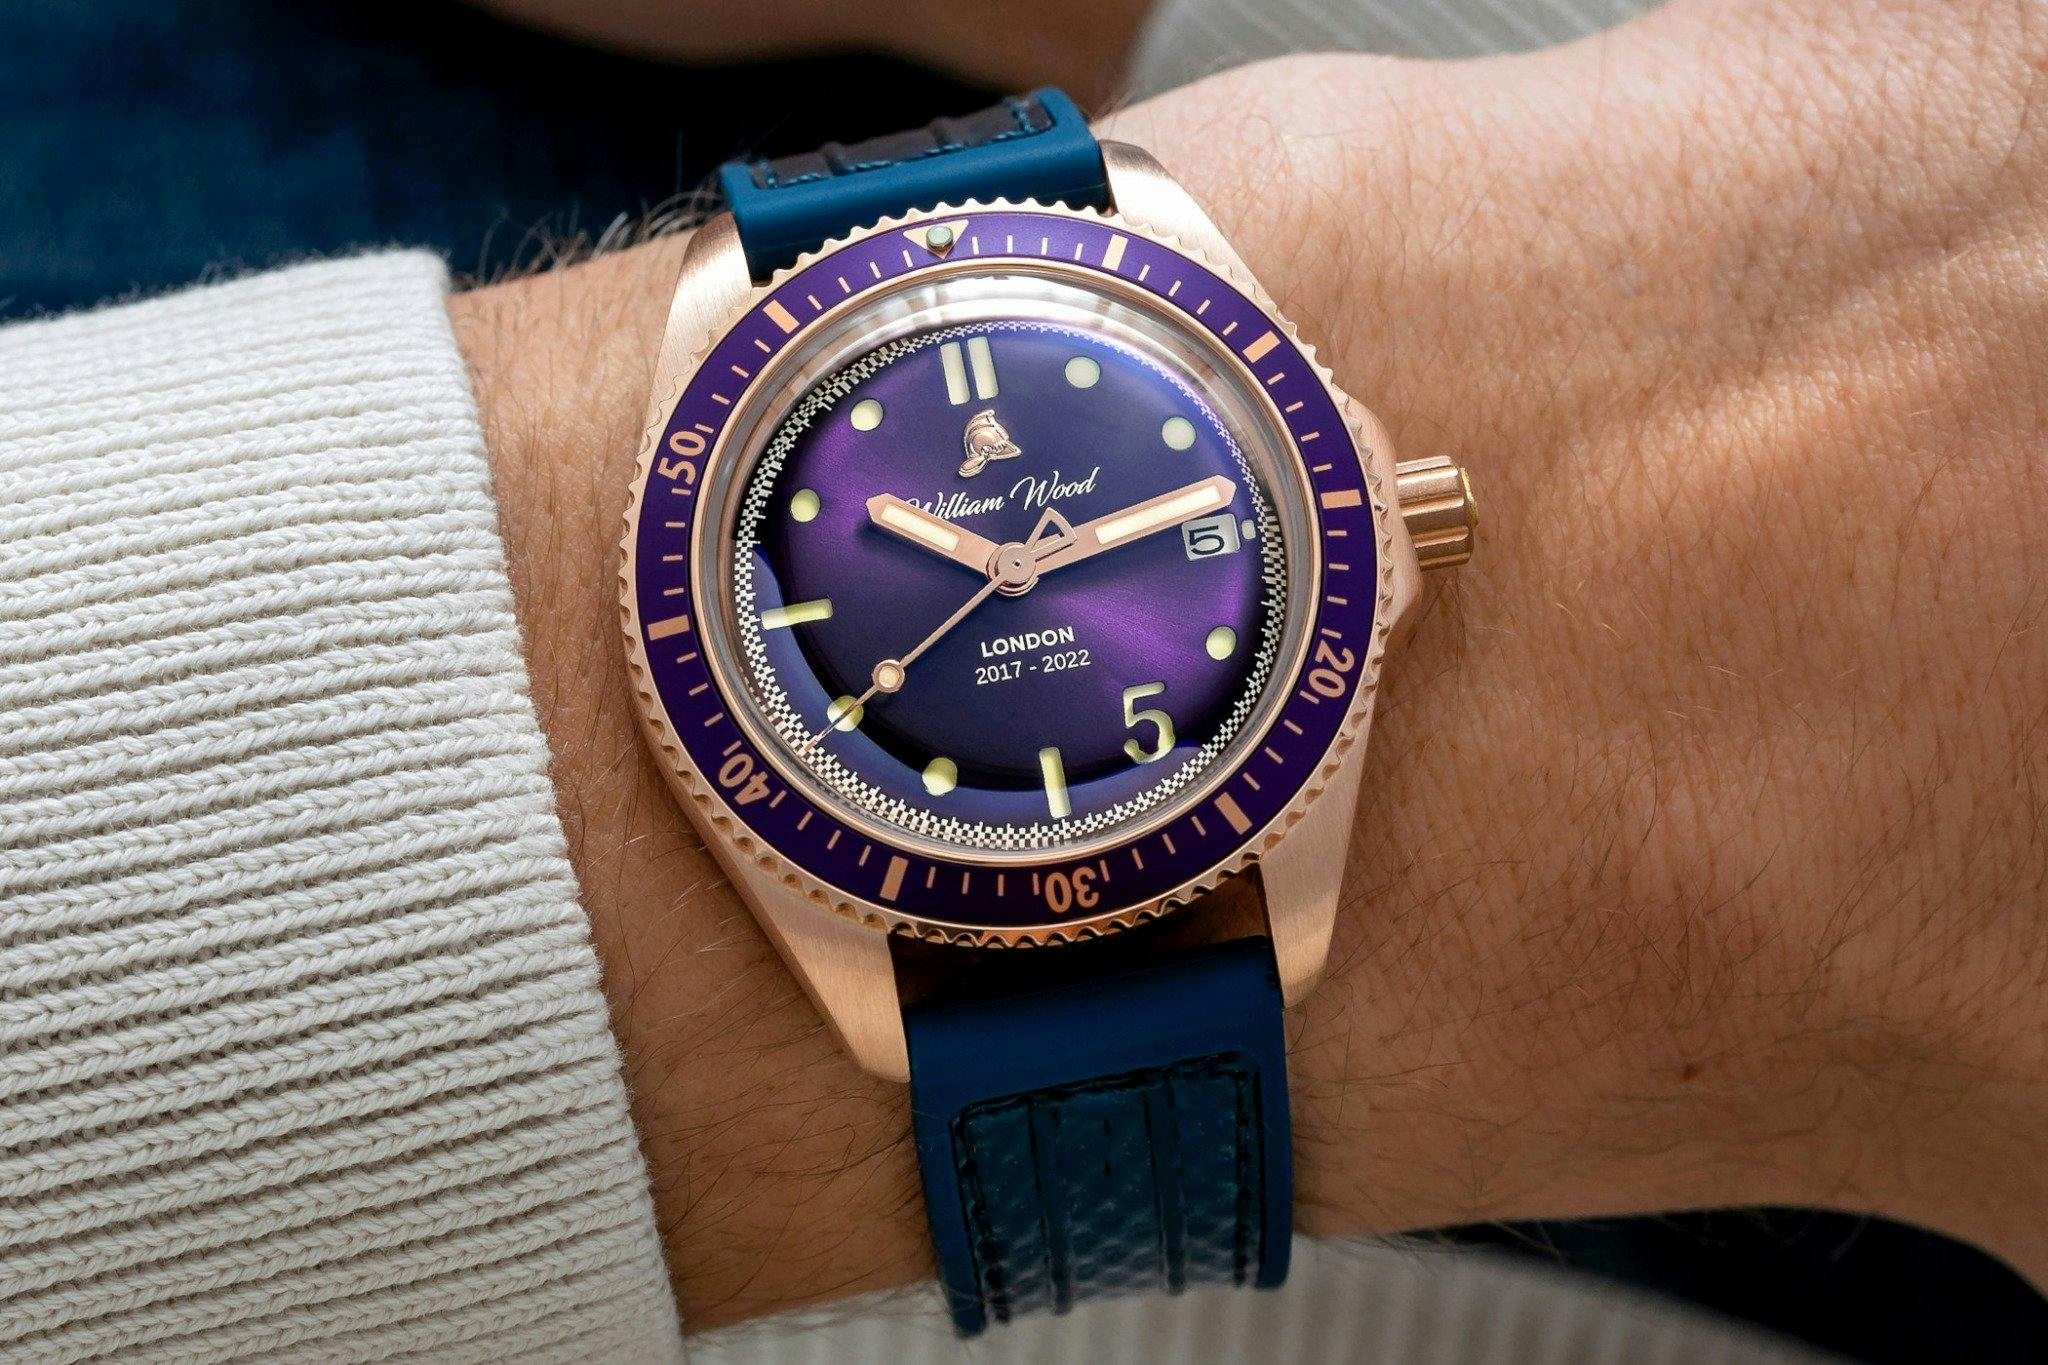 The unusual and extraordinary purple Anniversary watch from William Wood Watches. Note the single numeral at the 5 O'Clock position to celevrate five years in business.